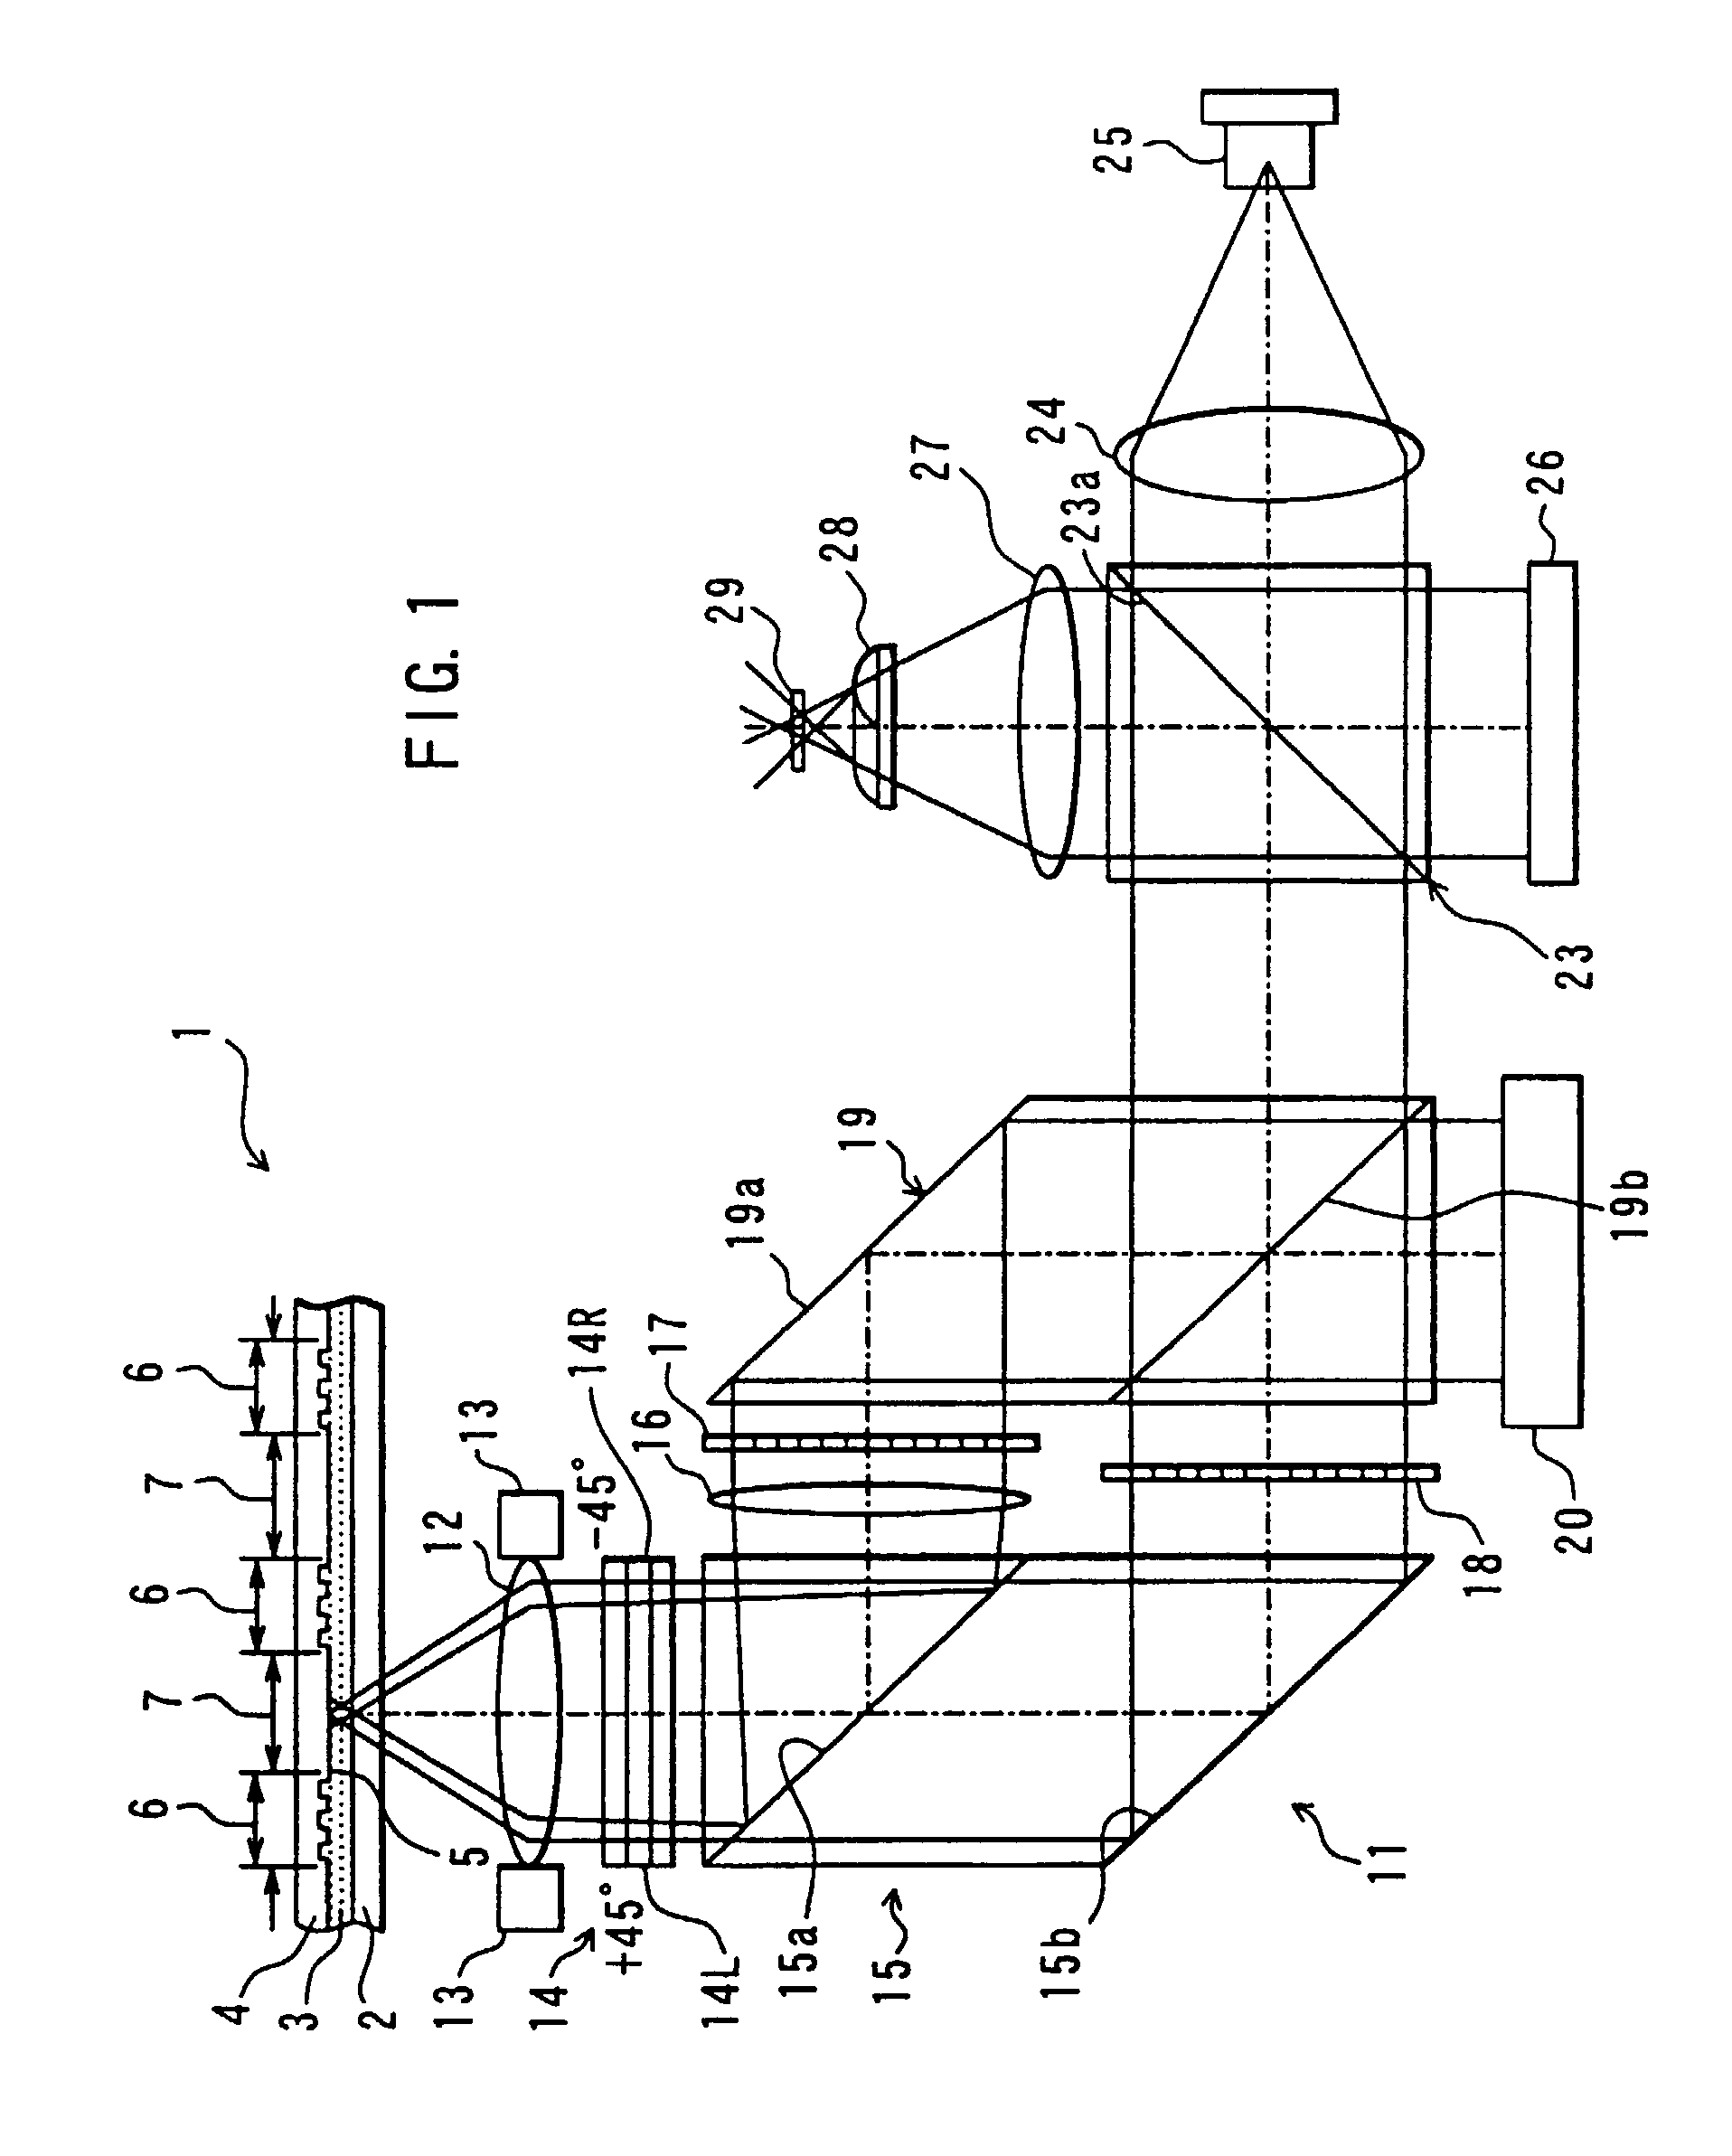 Apparatus for recording optical information